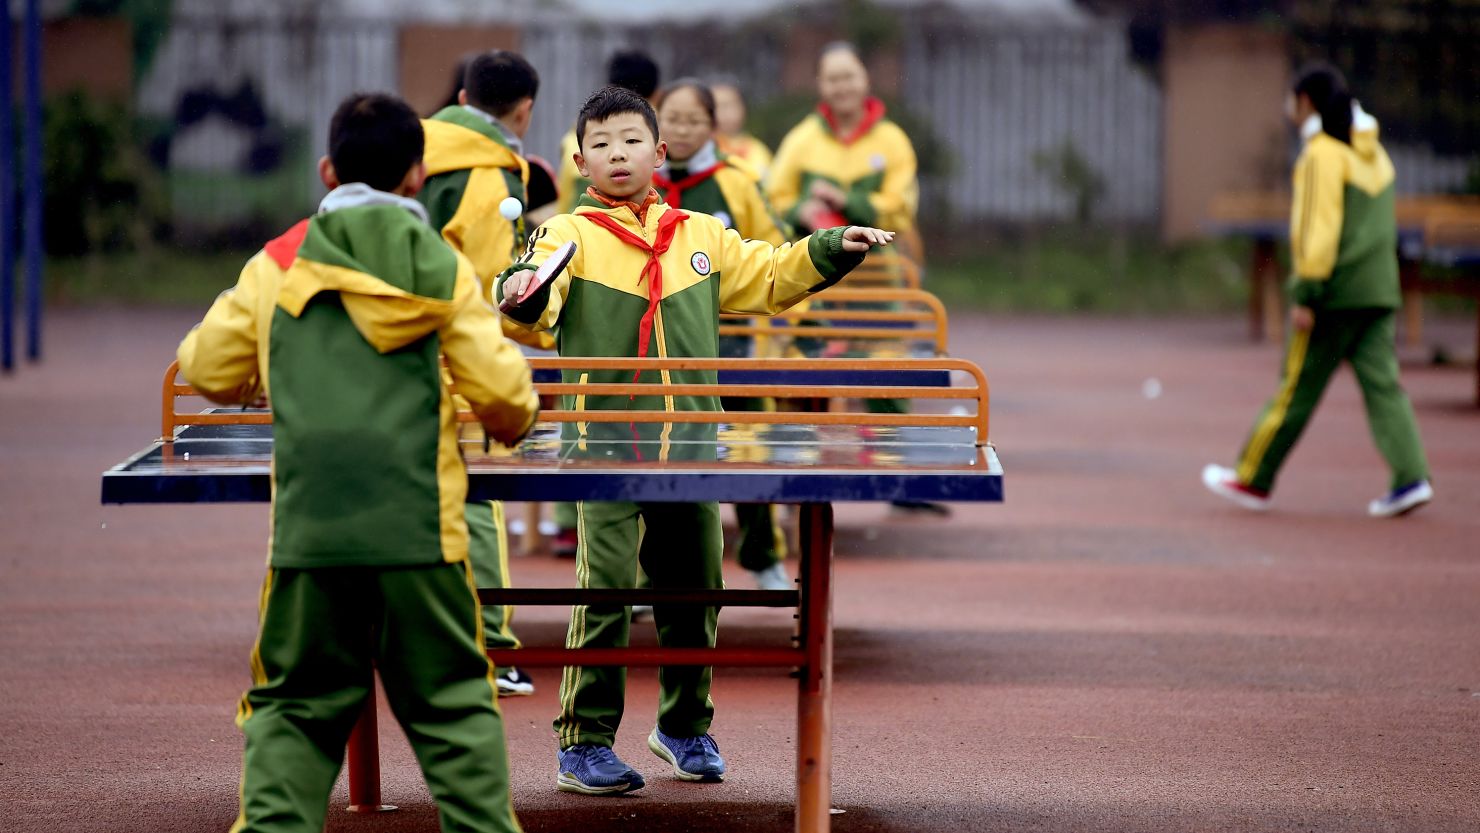 Students play table tennis in Dujiangyan, Sichuan province, China on December 8, 2018.